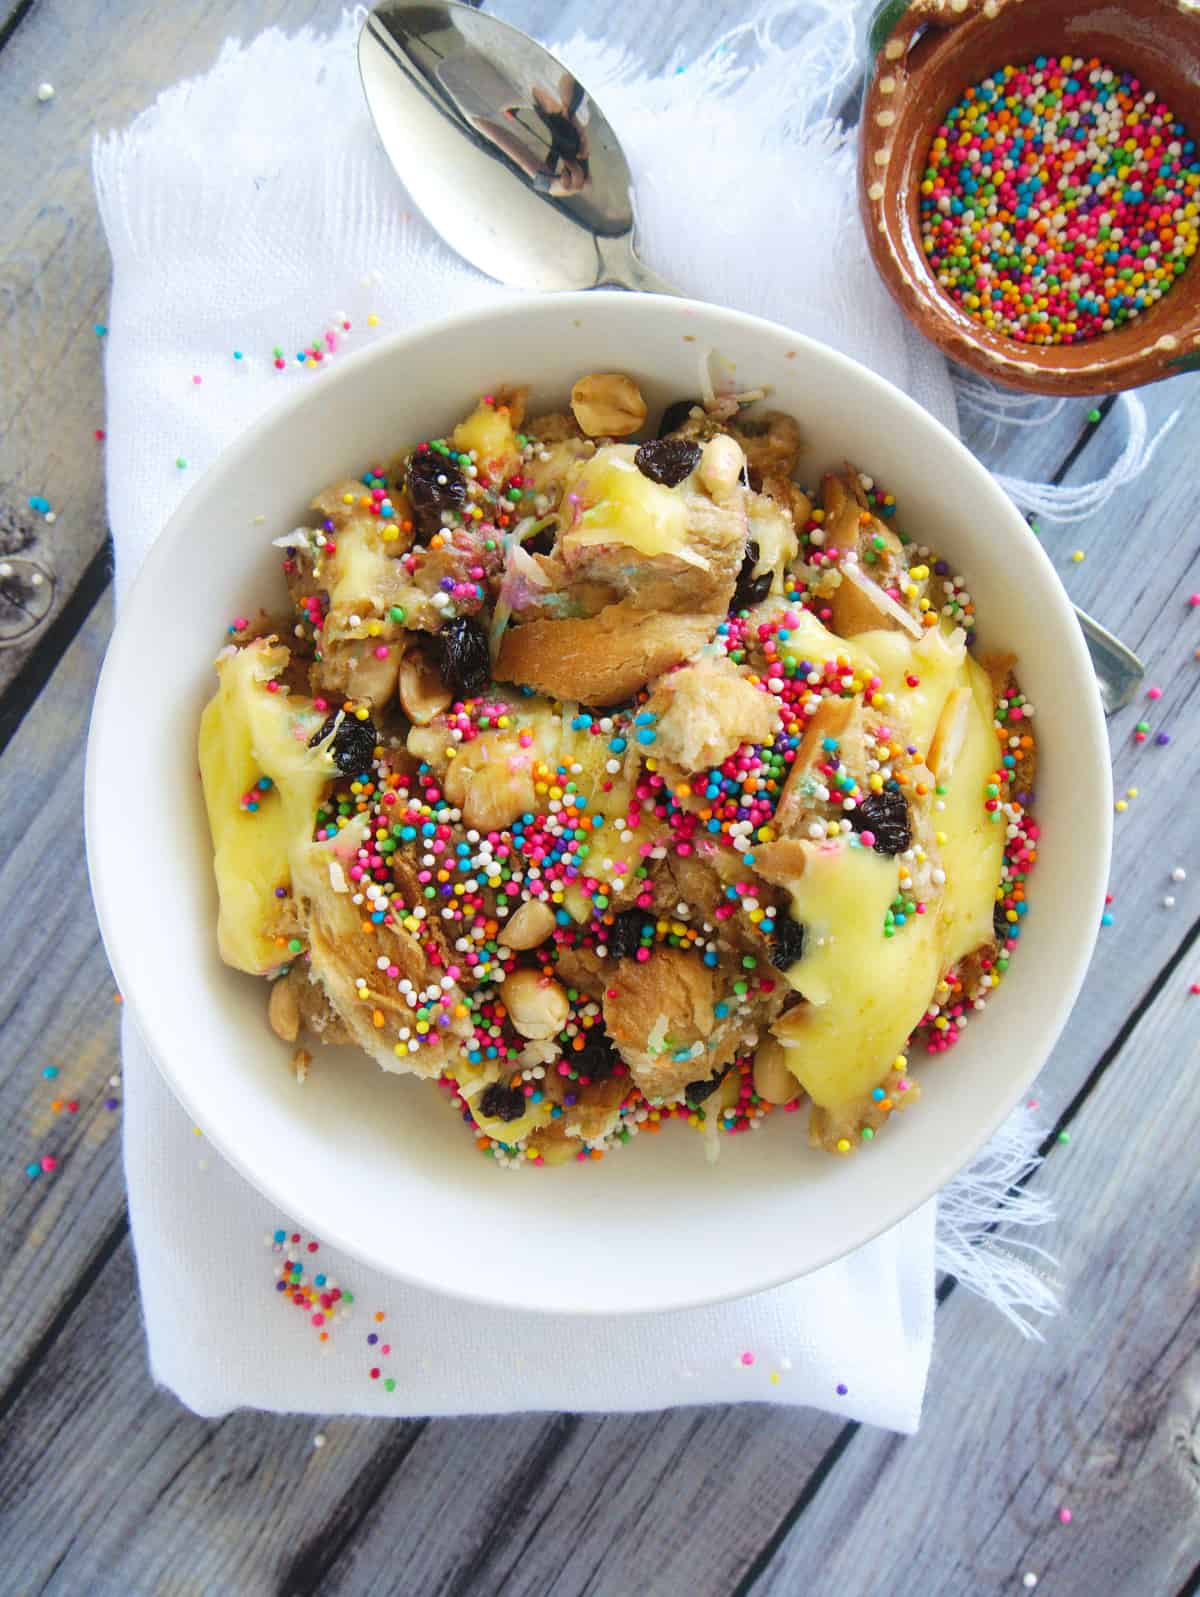 Capirotada (or Mexican Bread Pudding) served in a white bowl and topped with sprinkles.